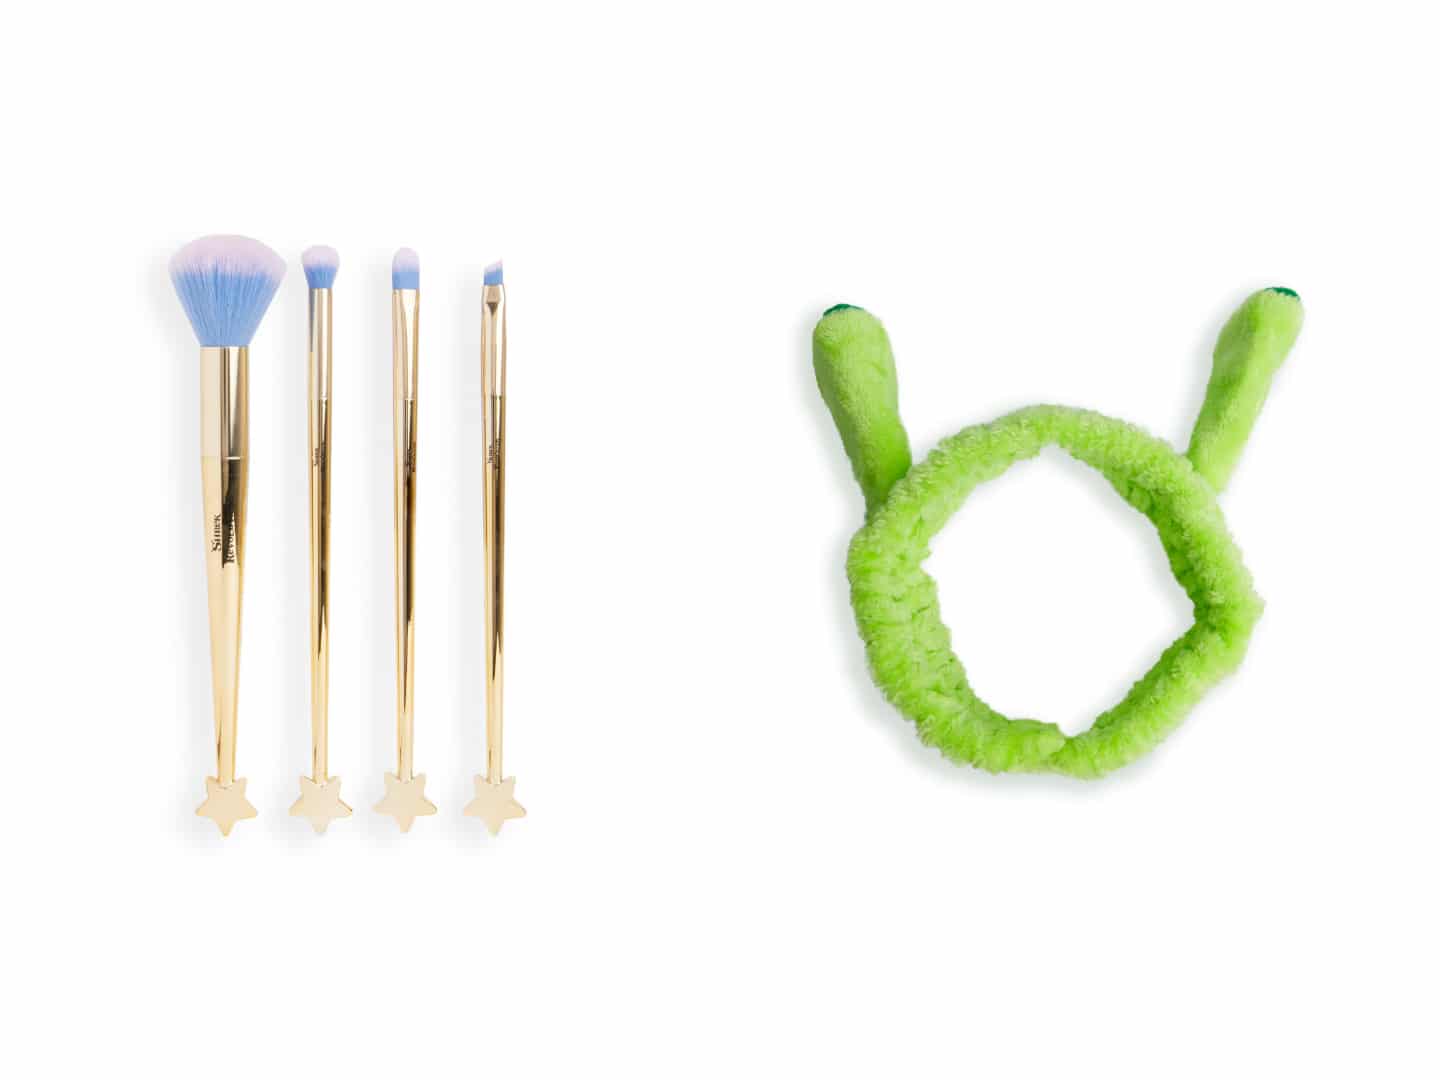 The accessories include a magic wand brush set and an ogre makeup headband.